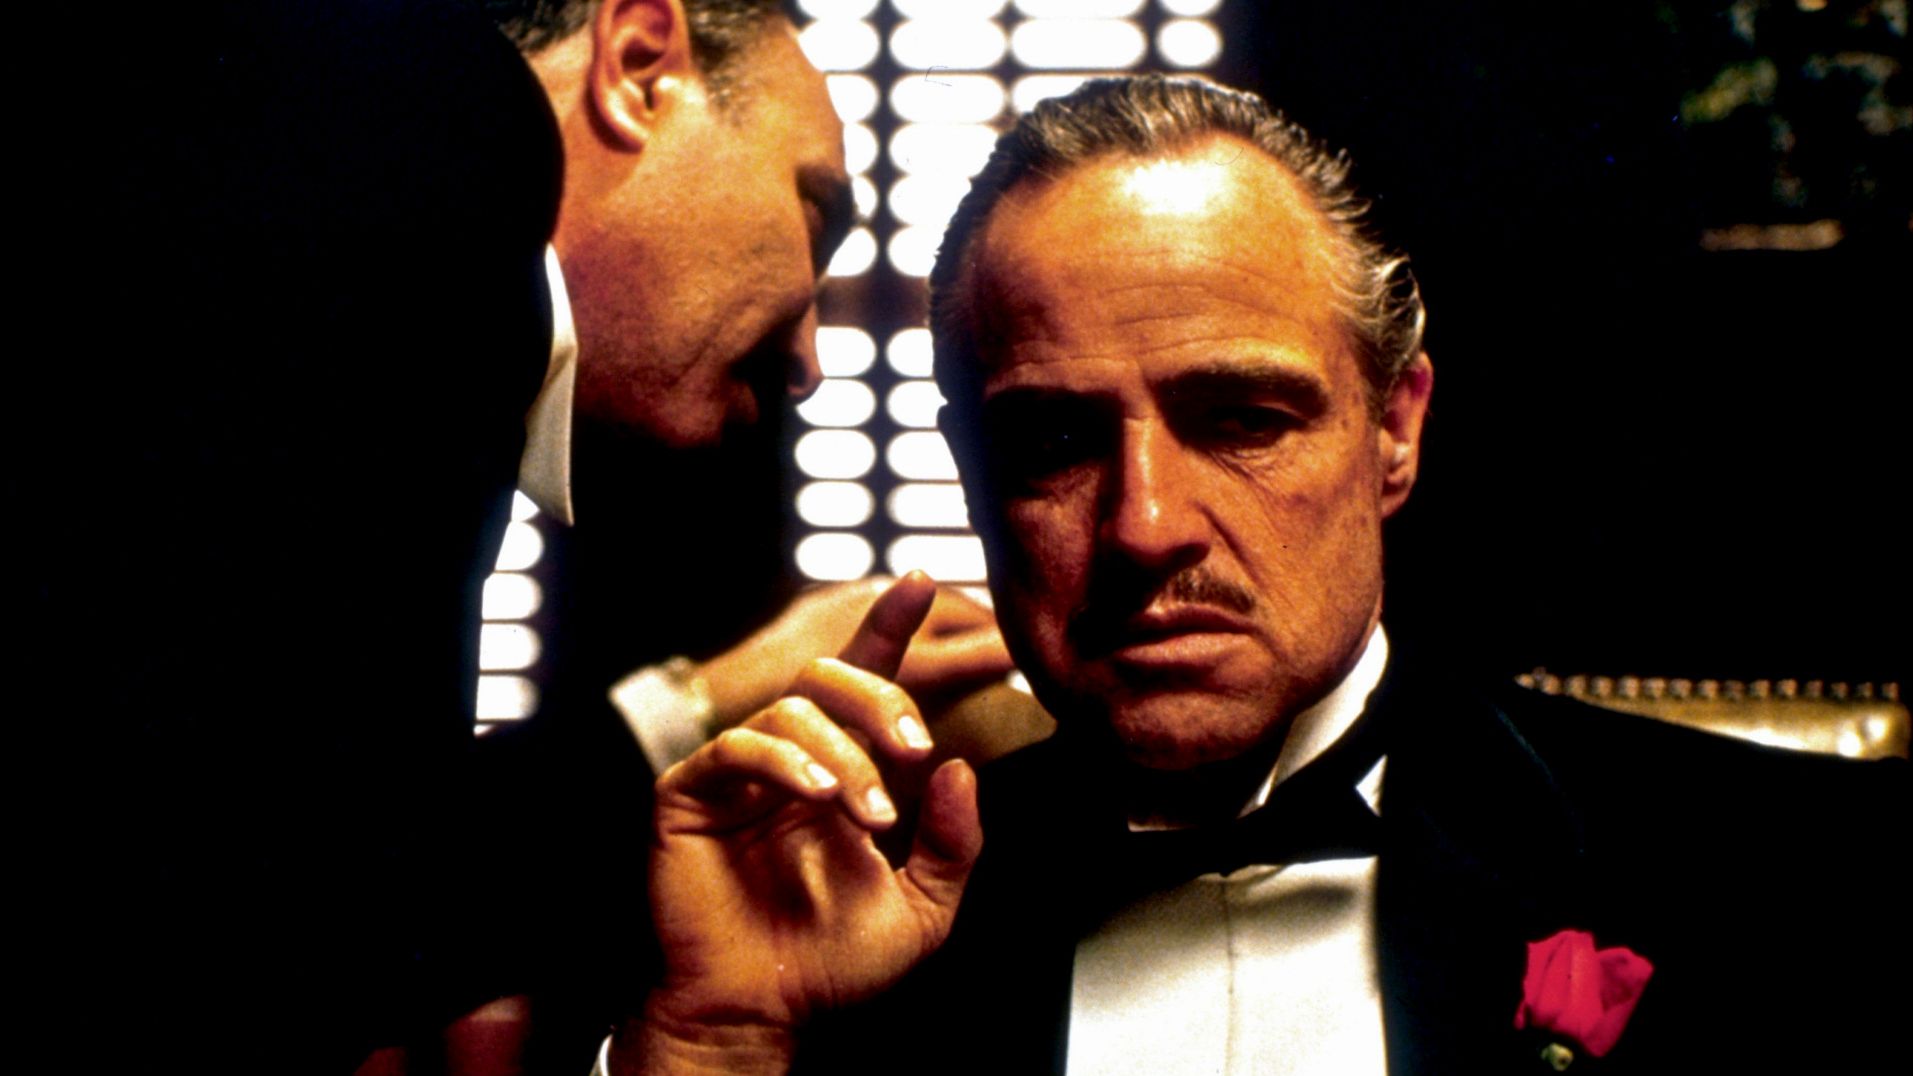 "I'm going to make him an offer he can't refuse." - The Godf